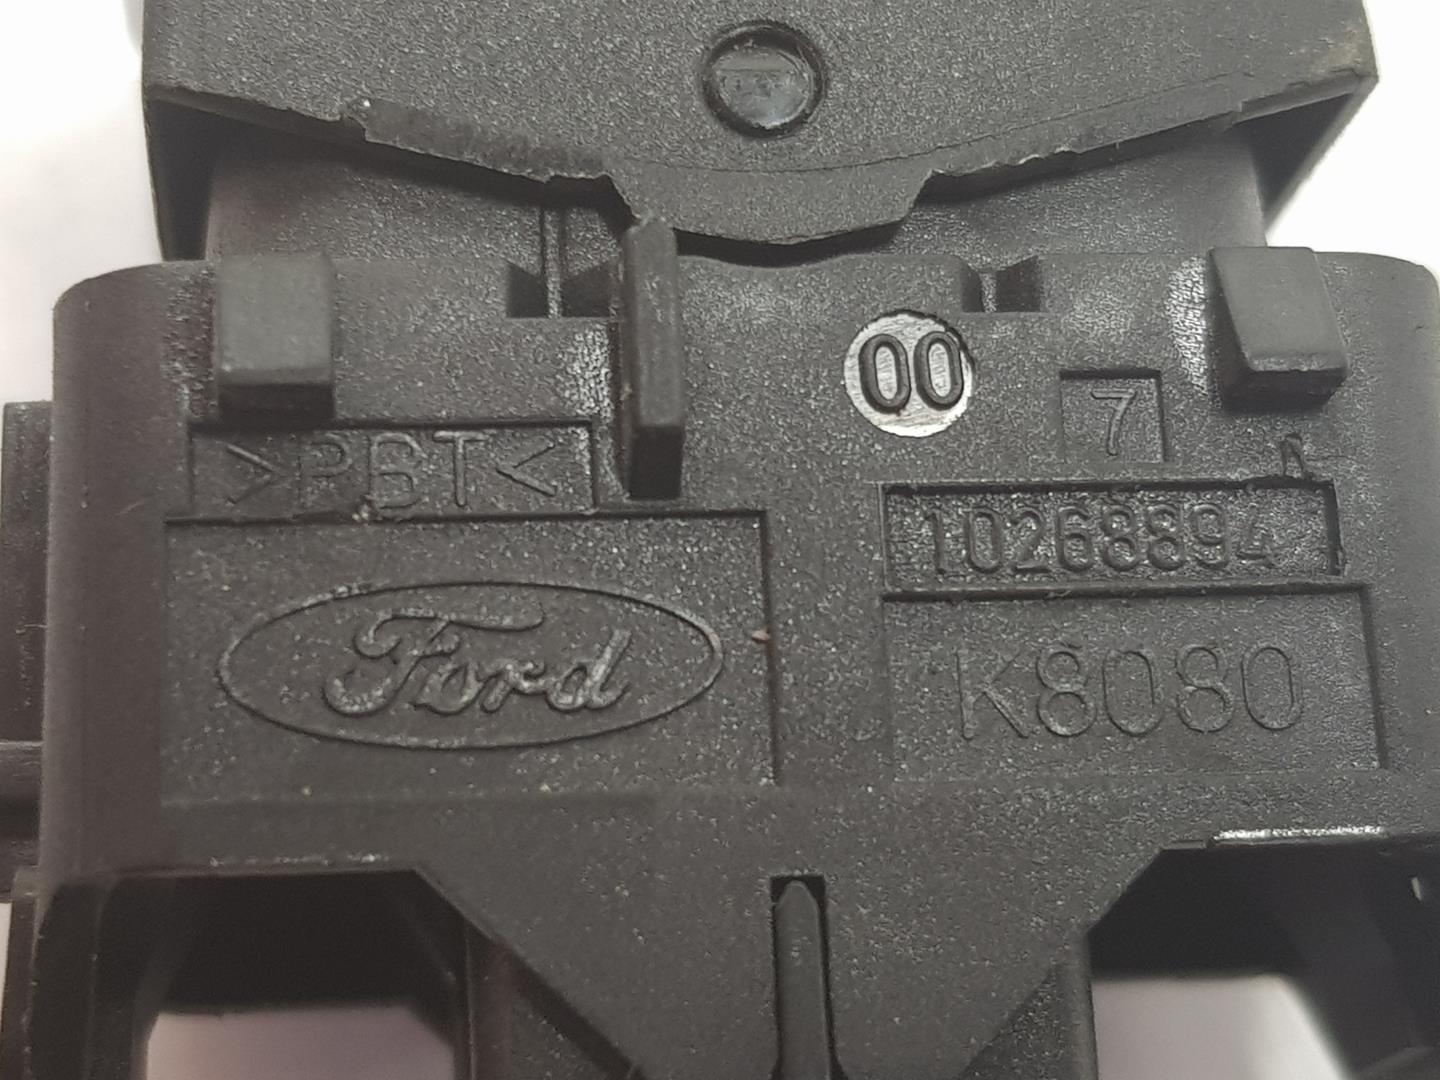 FORD Kuga 2 generation (2013-2020) Rear Right Door Window Control Switch 1850432, F1ET14529AA, 1141CB2222DL 19935301